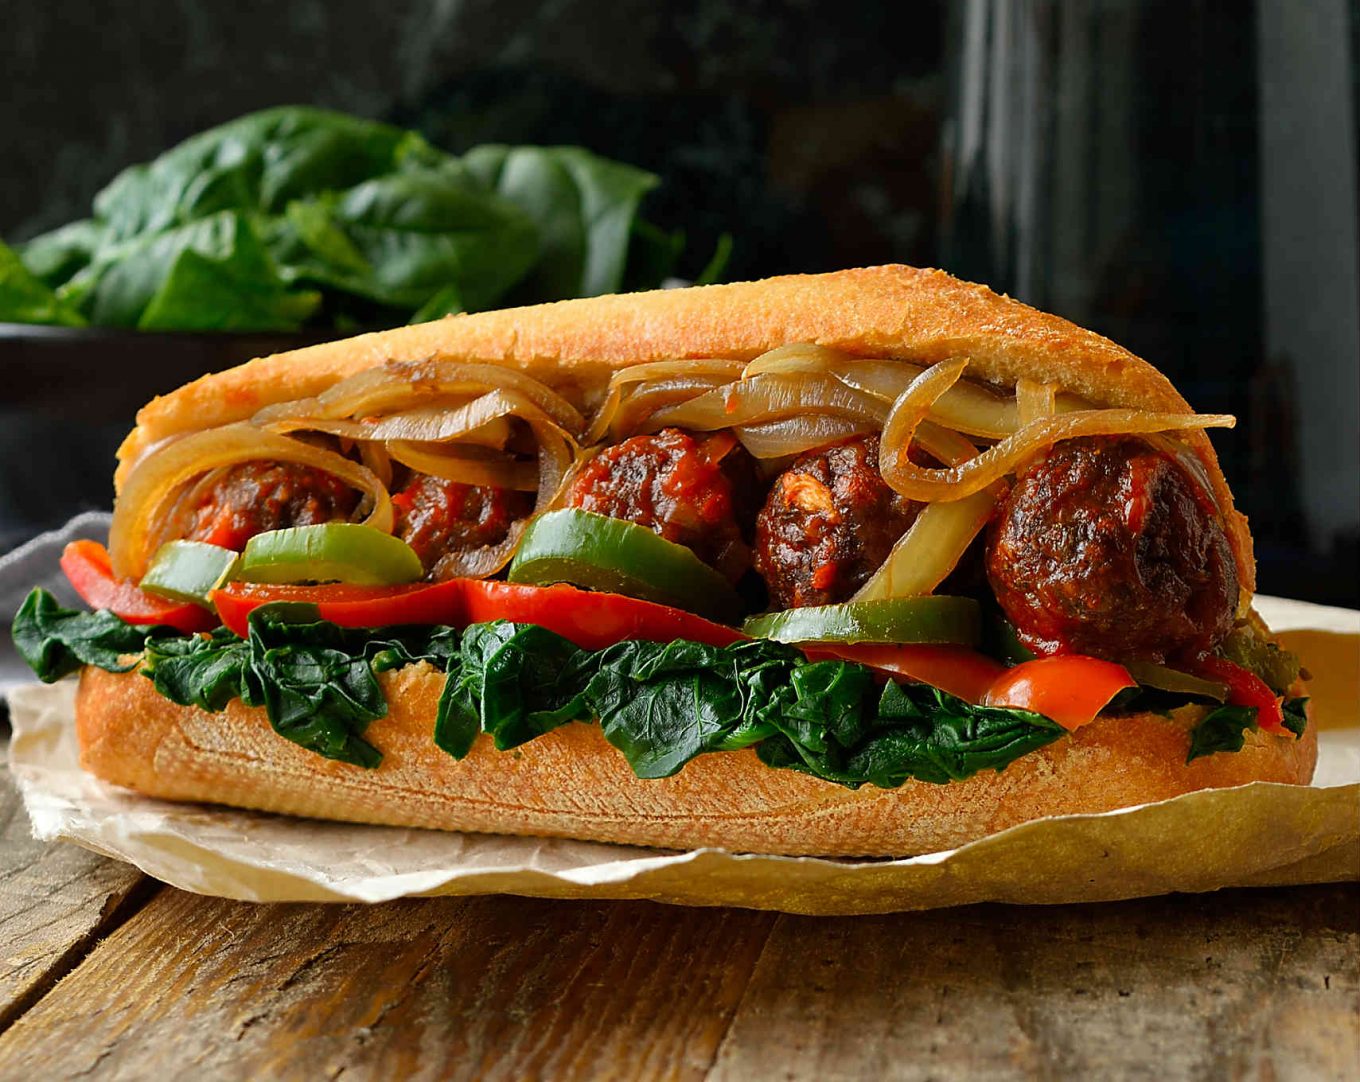 This vegan meatball sub sandwich is super hearty, super flavourful and chock full of veggies. Baked lentil and mushroom meatballs smothered in marinara sauce and served up in a crusty bun stuffed with spinach, onion and peppers. You might need a knife and fork to get these bad boys in your mouth!